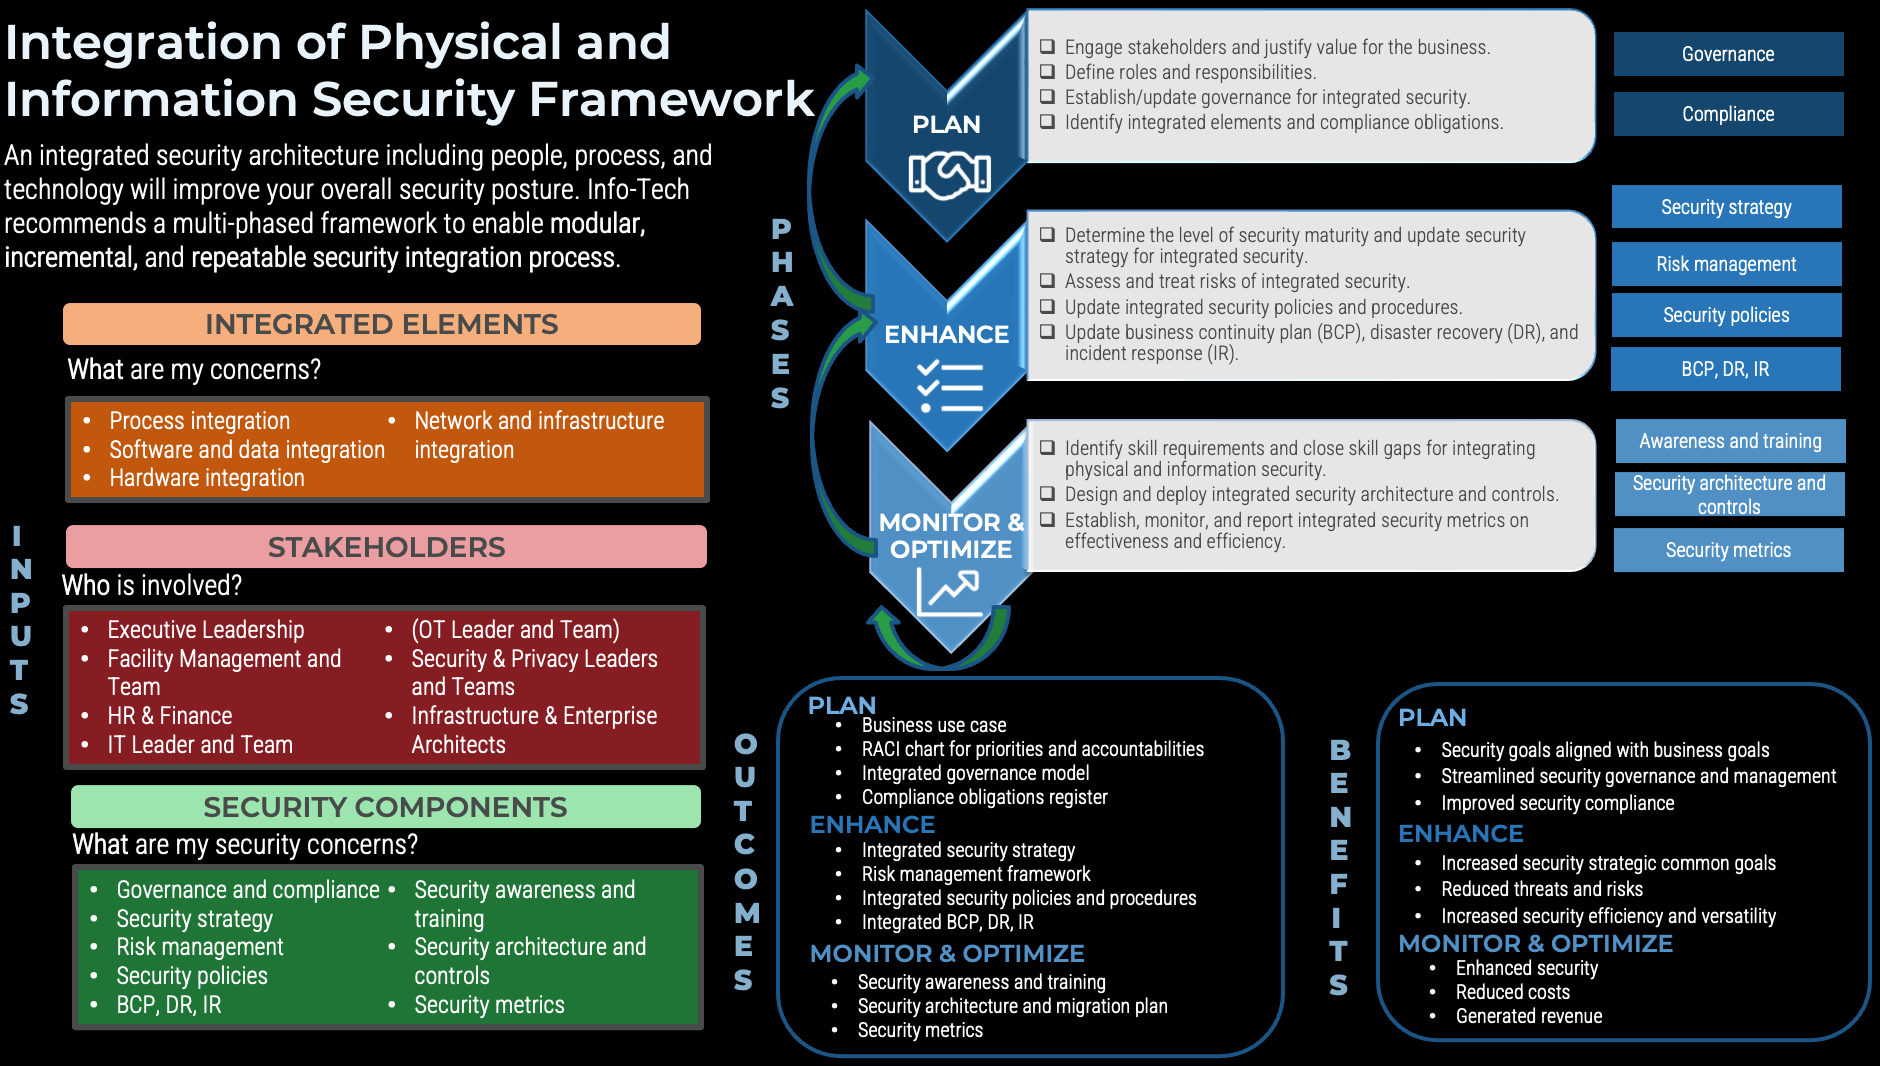 Integration of Physical and Information Security Framework. Inputs: Integrated Items, Stakeholders, and Security Components. Phases, Outcomes and Benefits: Plan, Enhance and Monitor & Optimize.